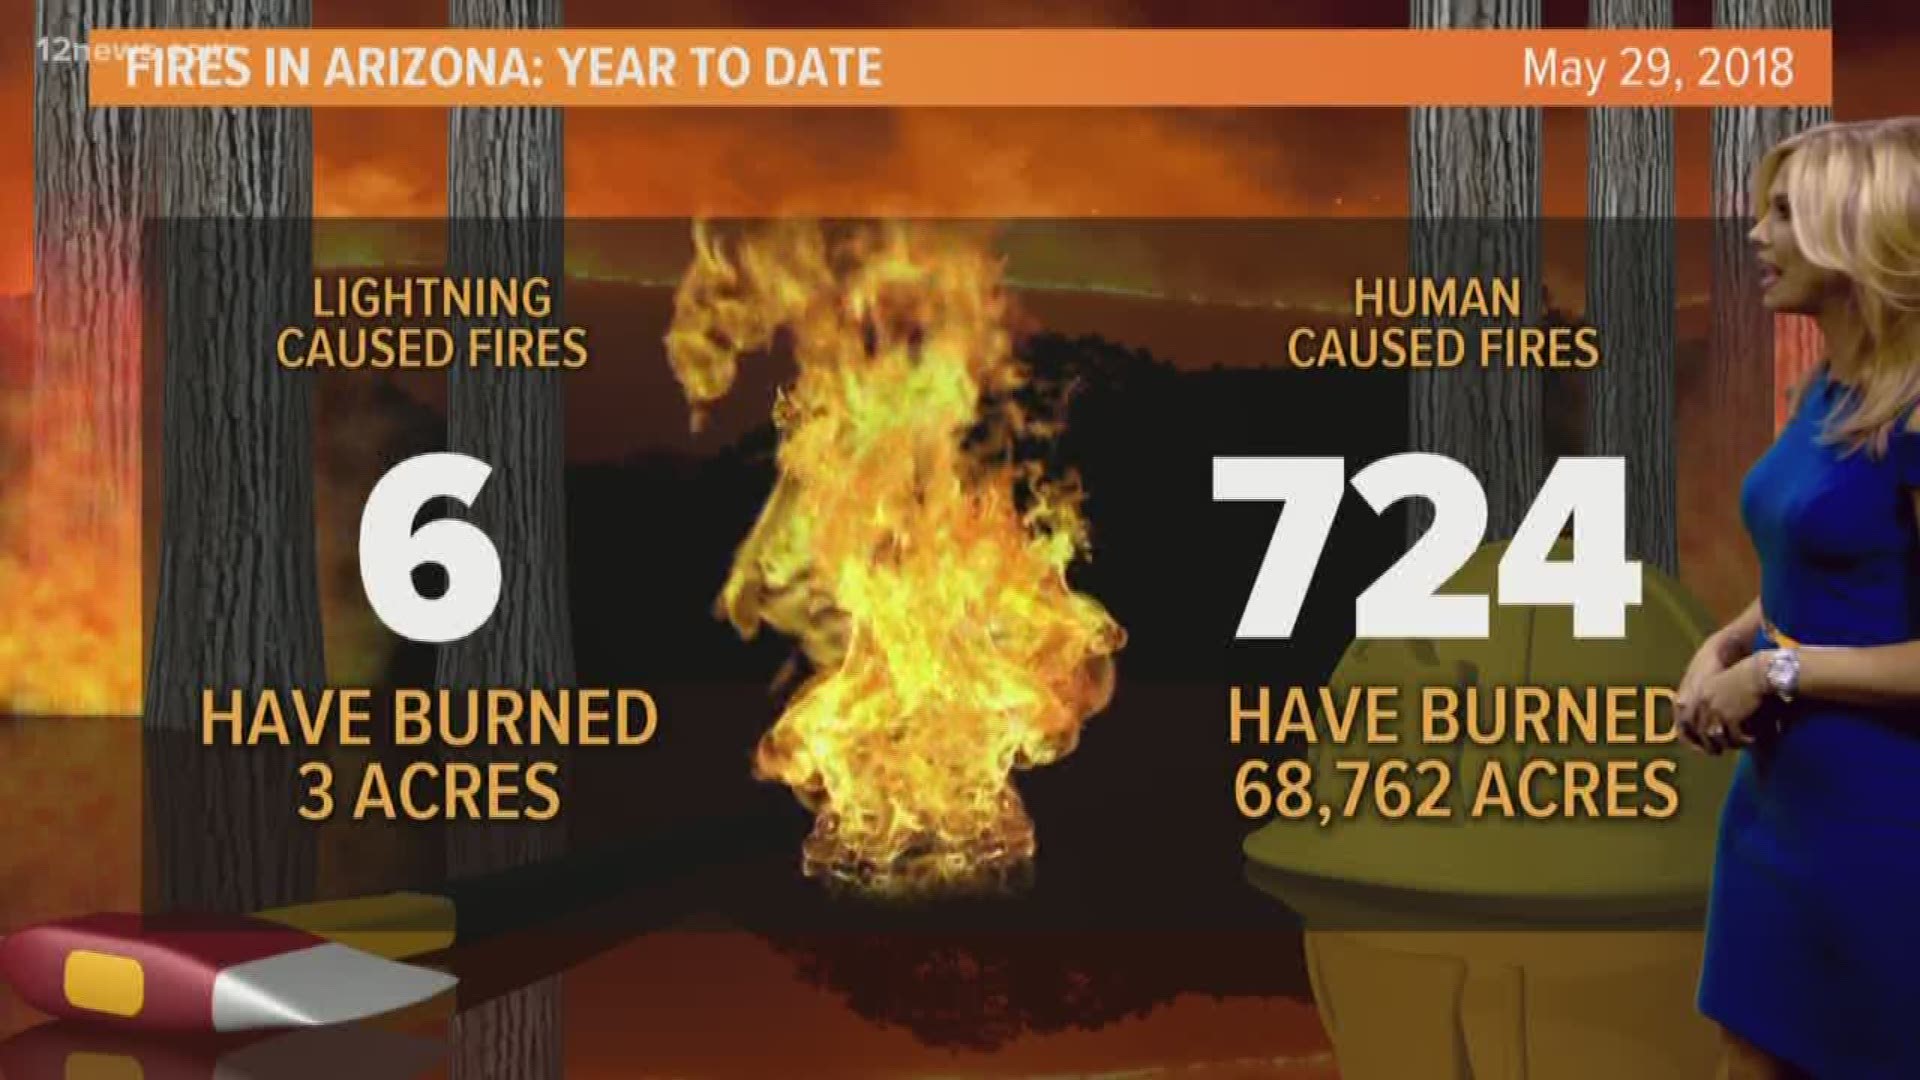 Human caused wildfires in Arizona have already burned about 69,000 acres in 2018.